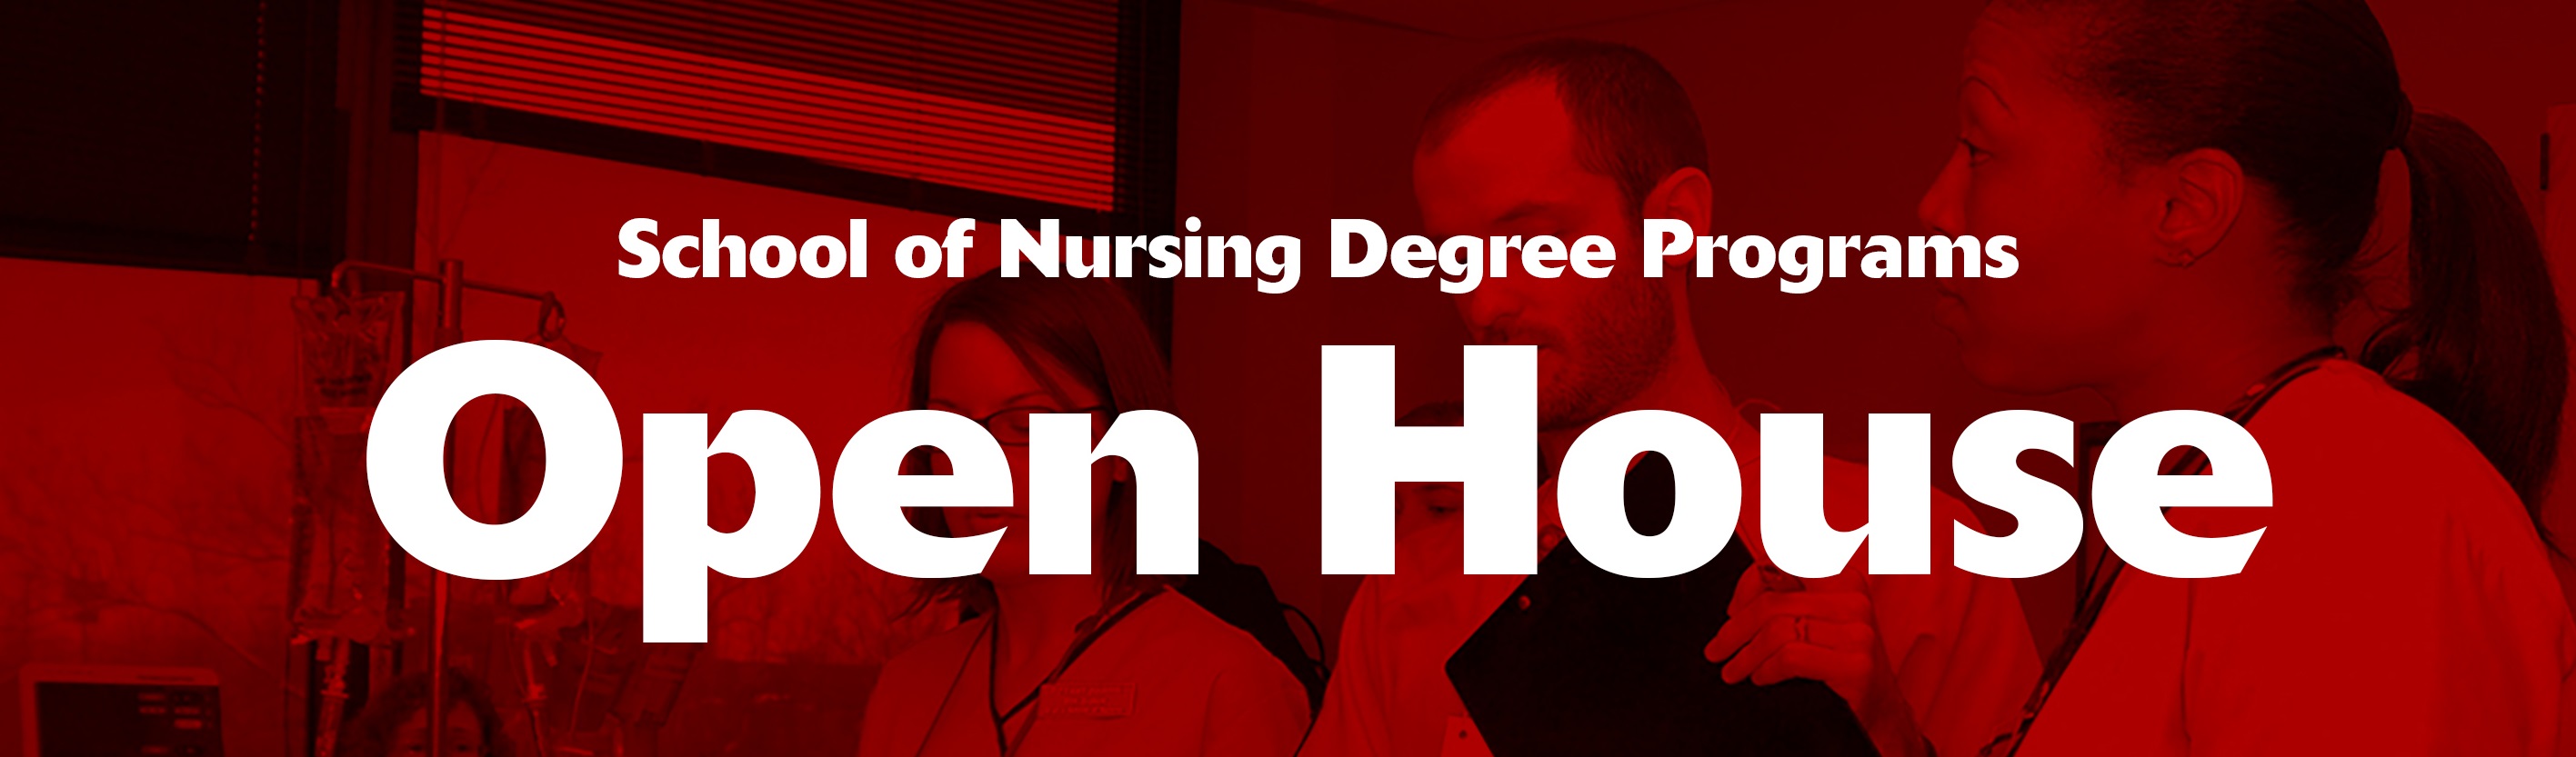 Learn more about School of Nursing degree programs at information session